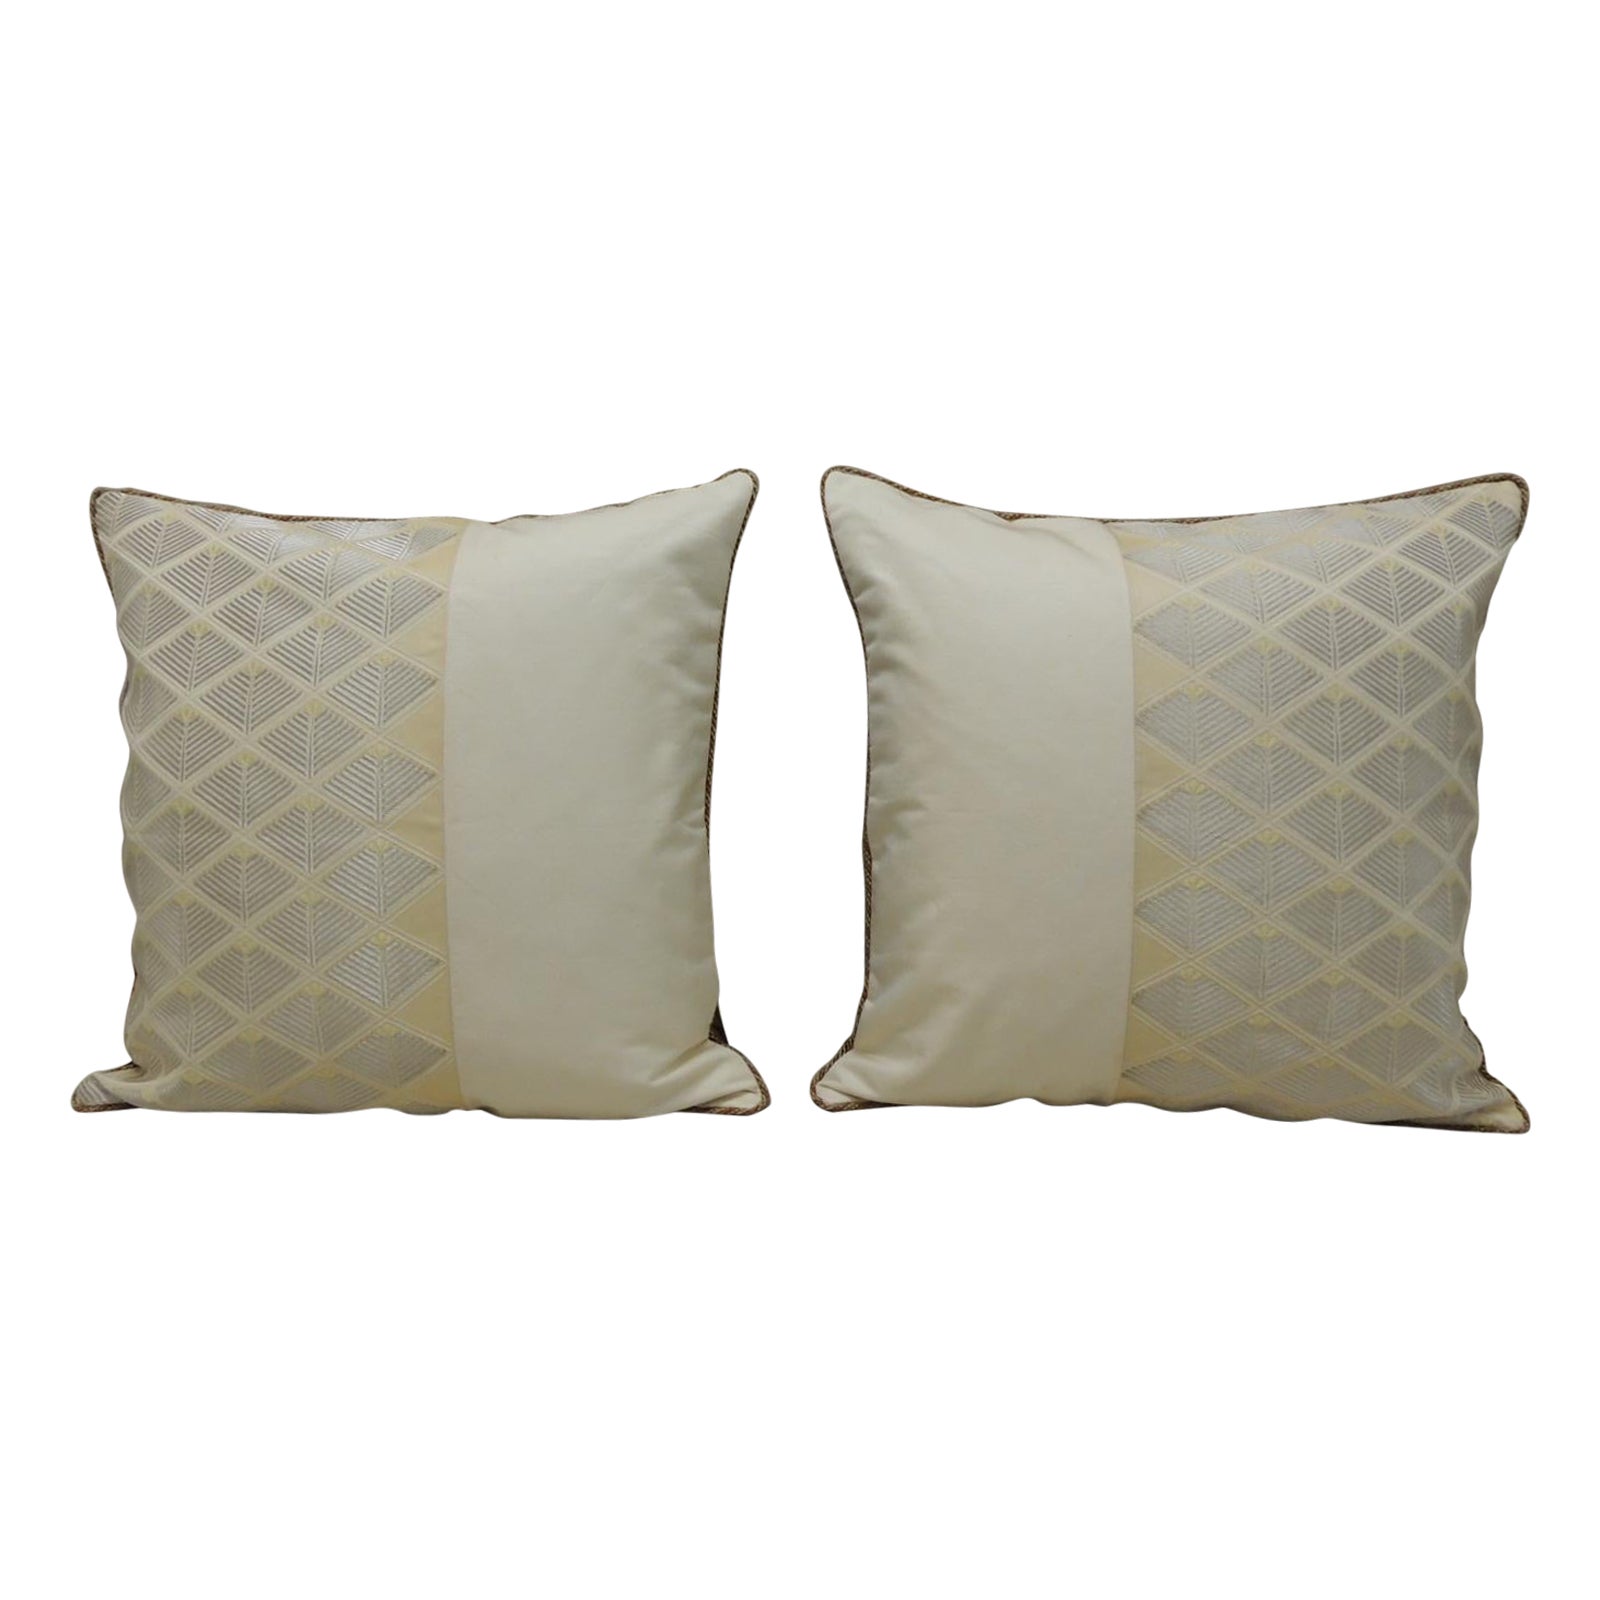 Pair of Vintage Woven Silk Gold and Silver Obi Square Decorative Pillows